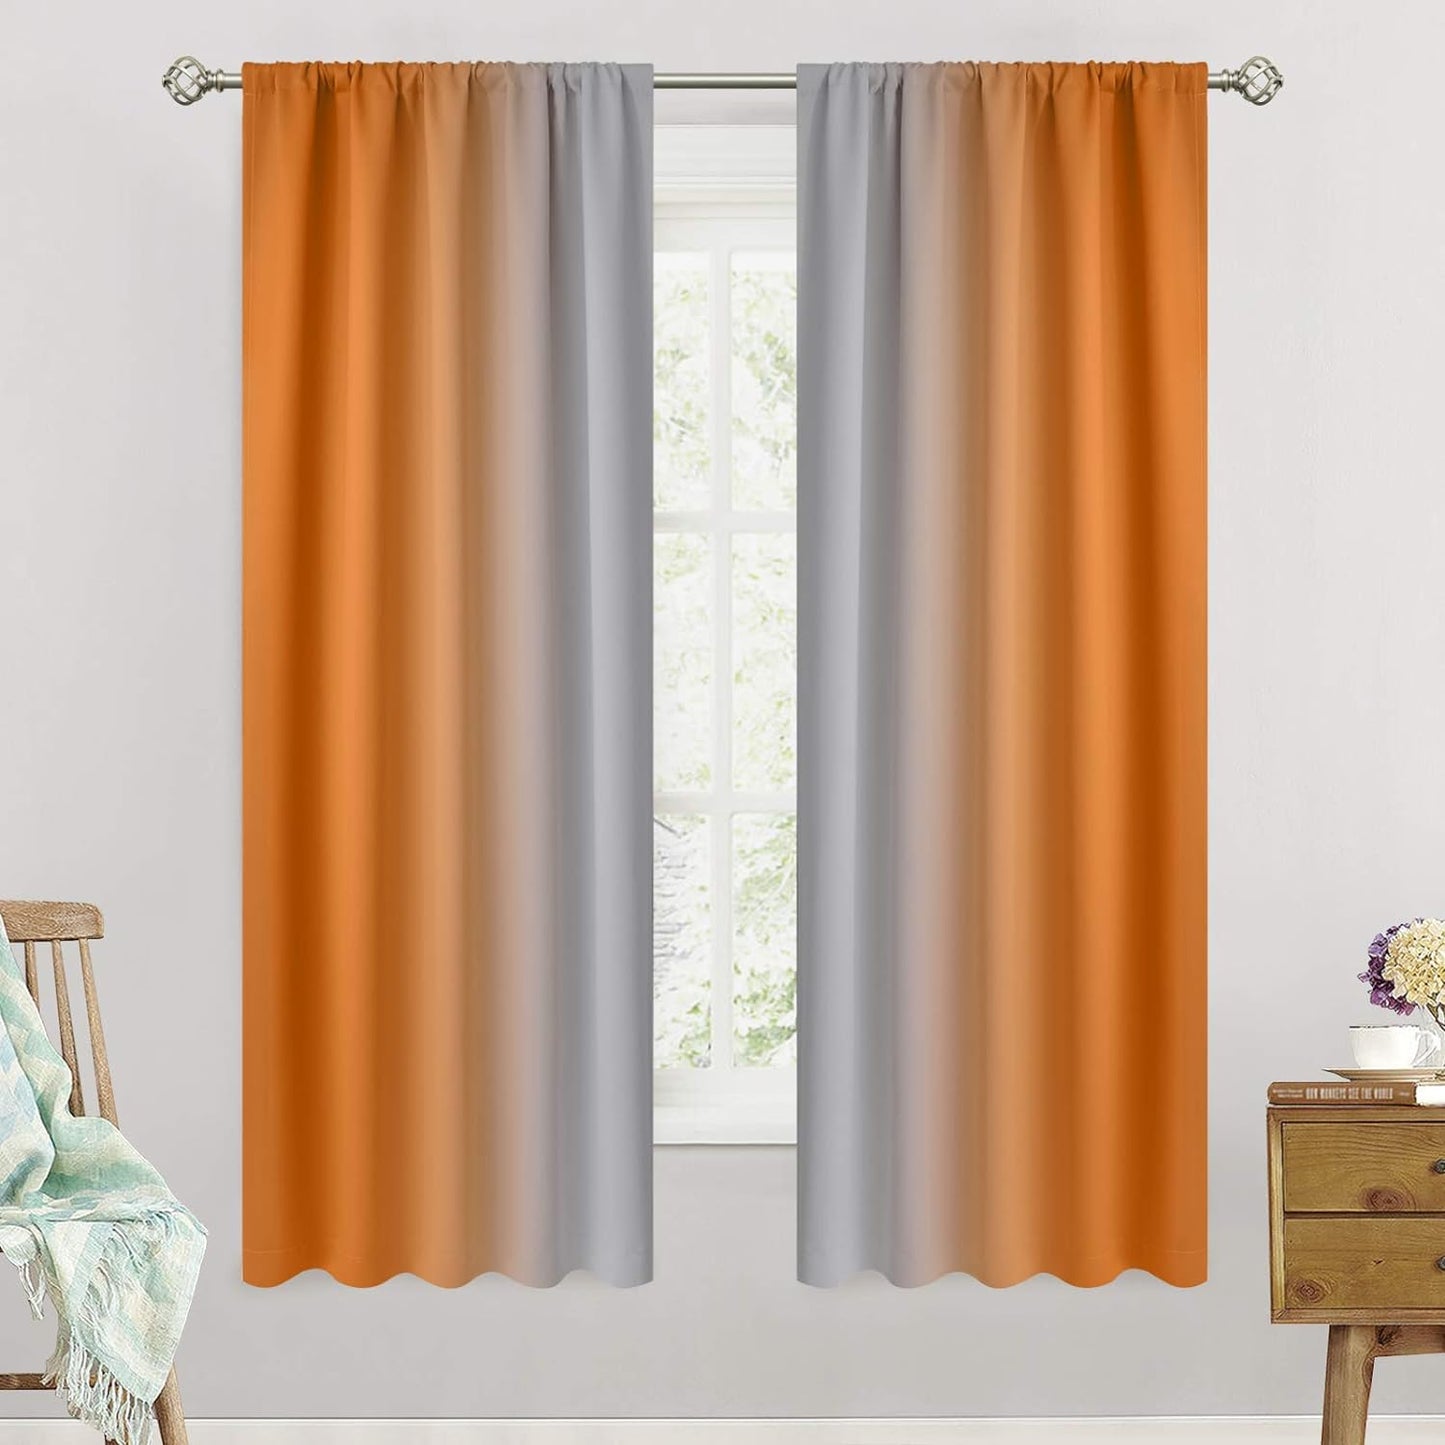 Simplehome Ombre Room Darkening Curtains for Bedroom, Light Blocking Gradient Purple to Greyish White Thermal Insulated Rod Pocket Window Curtains Drapes for Living Room,2 Panels, 52X84 Inches Length  SimpleHome Orange 52W X 63L / 2 Panels 